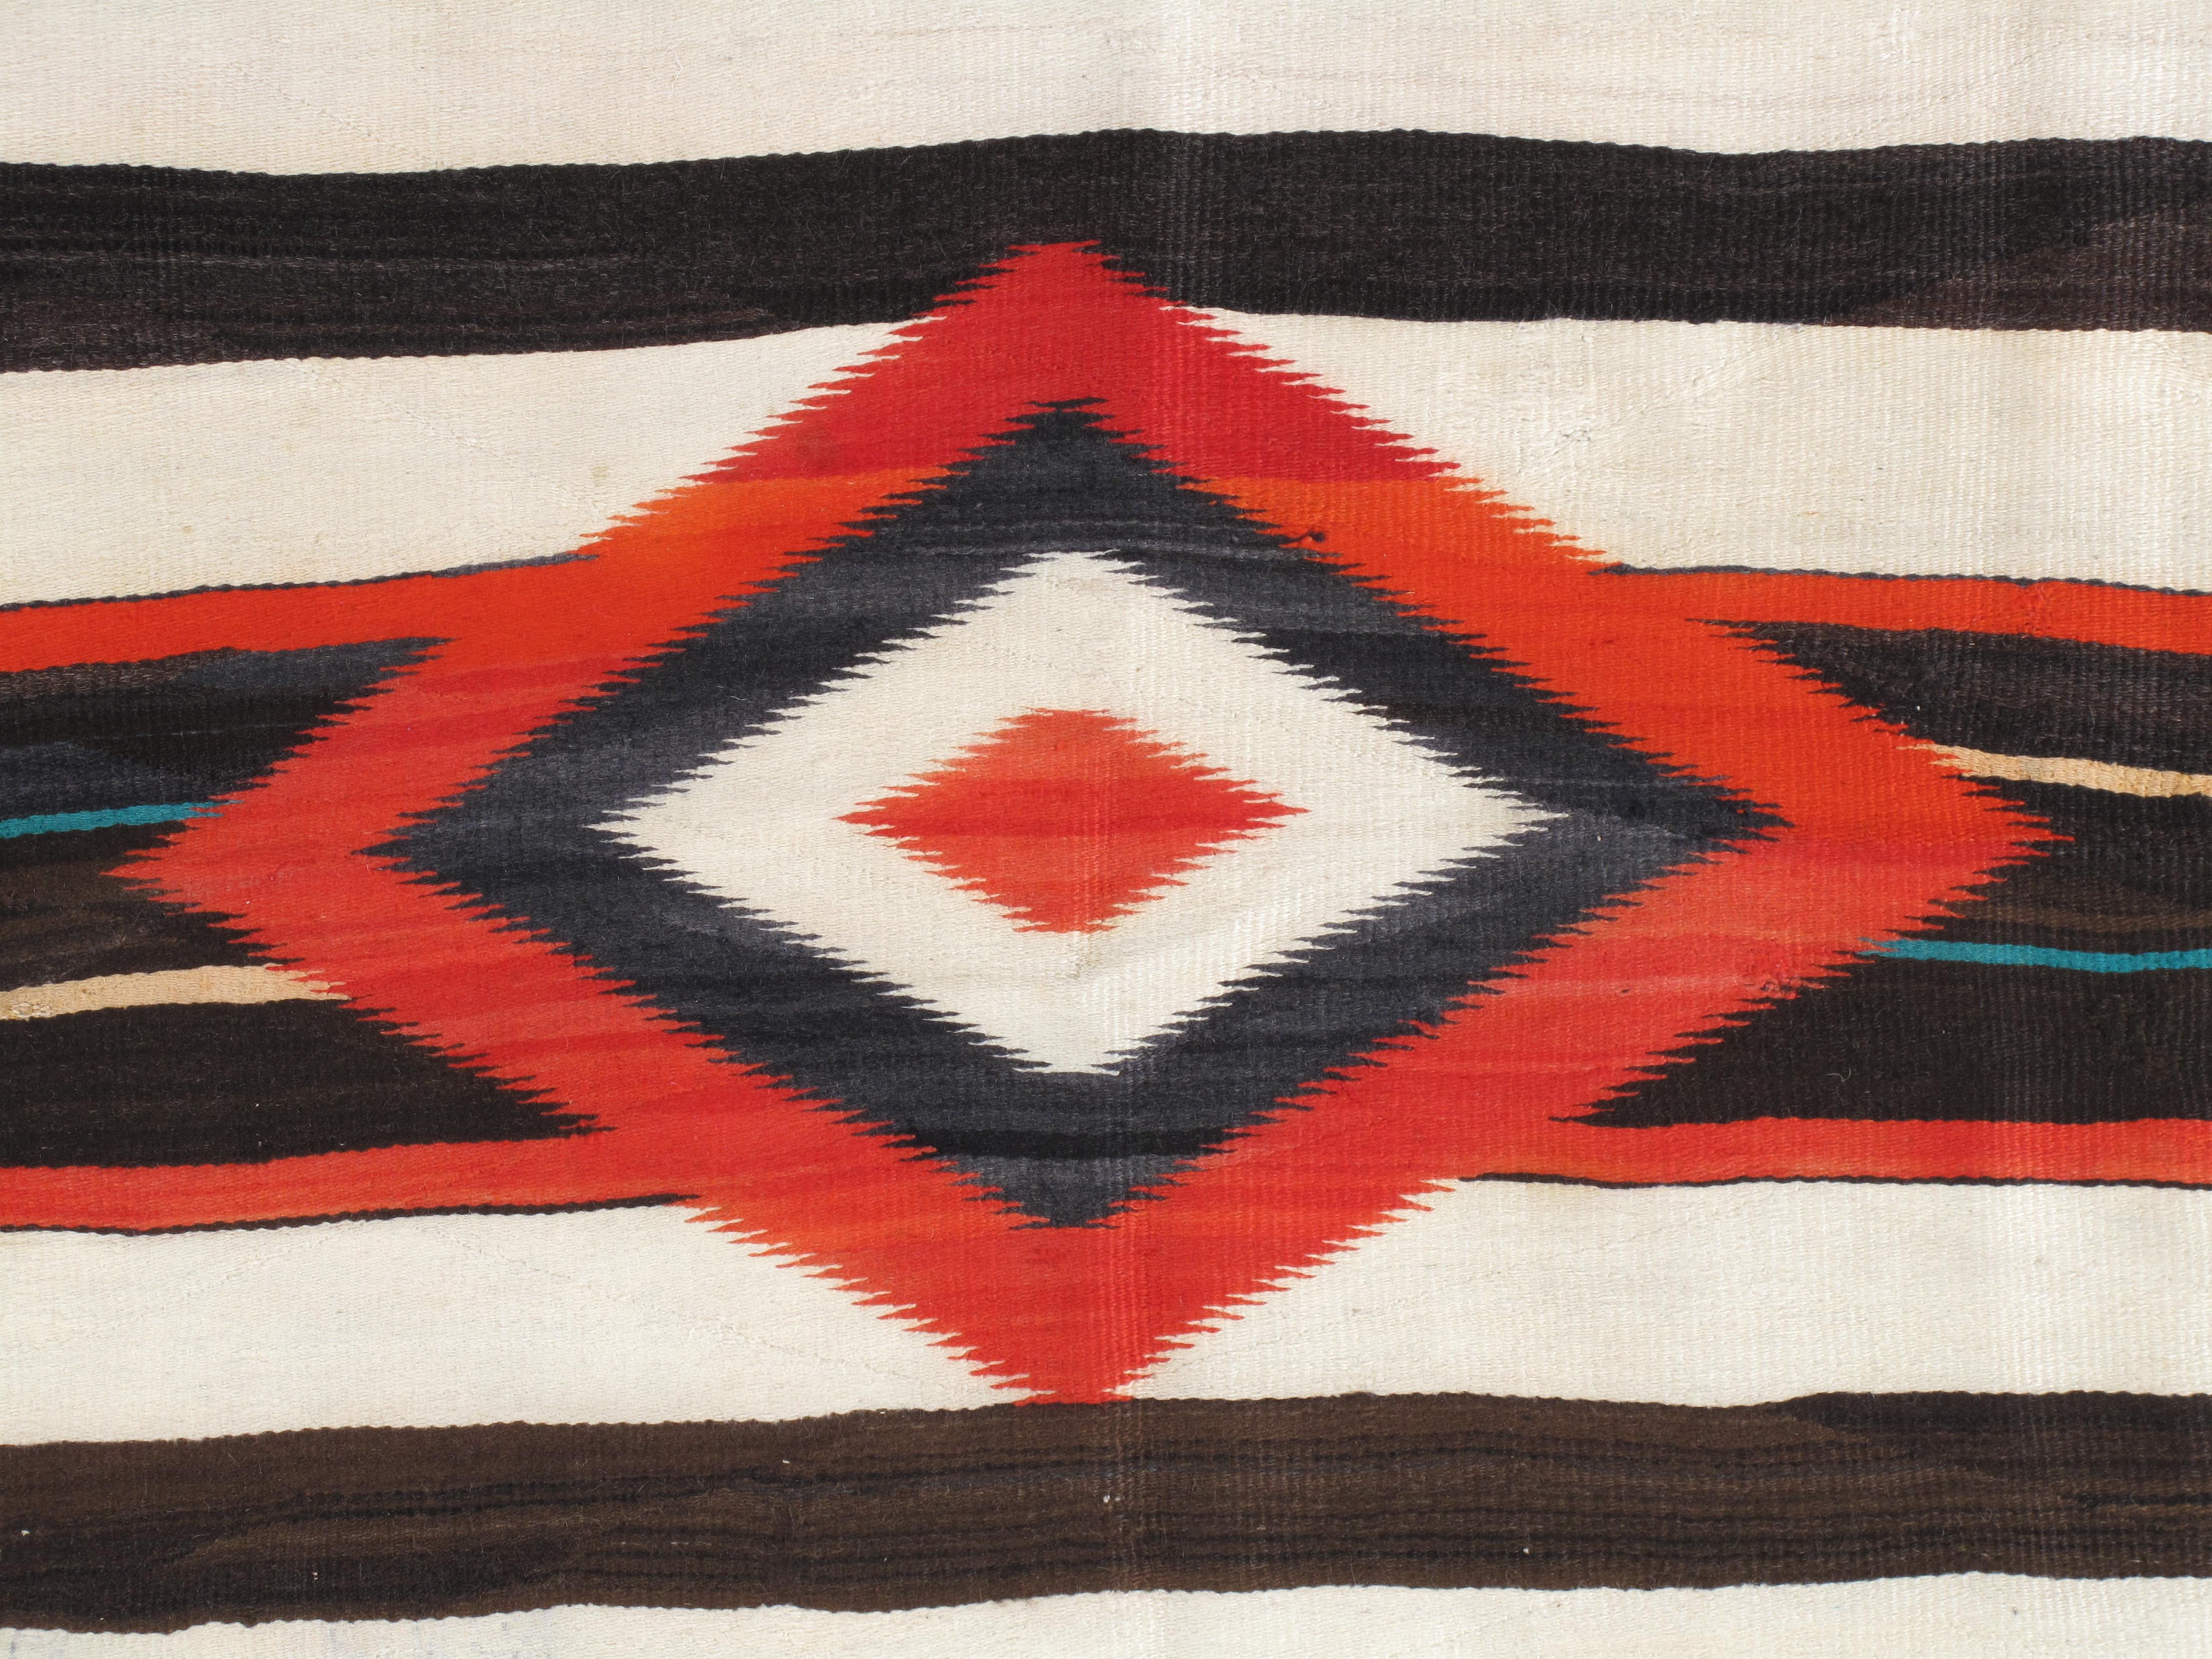 Navajo rugs and blankets are textiles produced by Navajo people of the four corners area of the United States. Navajo textiles are highly regarded and have been sought after as trade items for over 150 years. Commercial production of handwoven